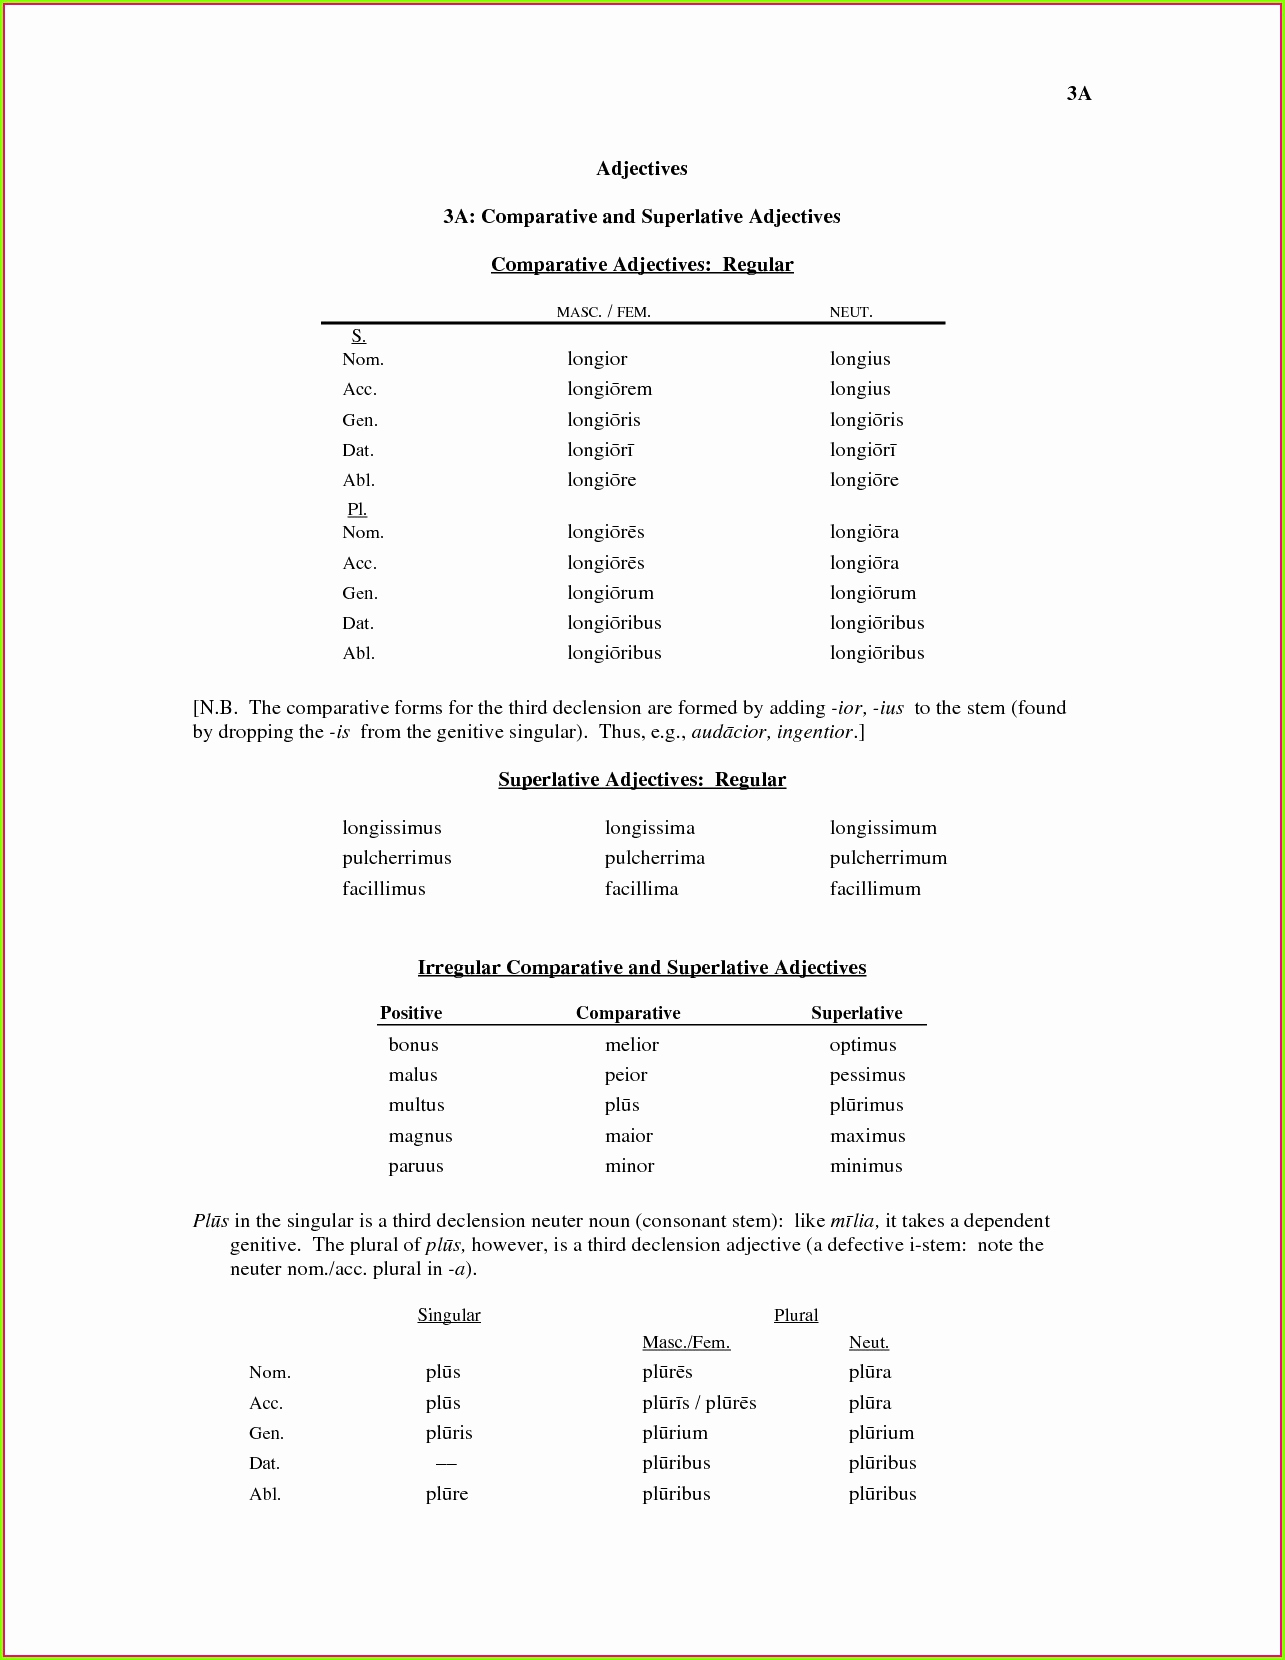 3rd Grade Adjectives Worksheets Luxury 3rd Grade Parative Adjectives Worksheet Worksheet